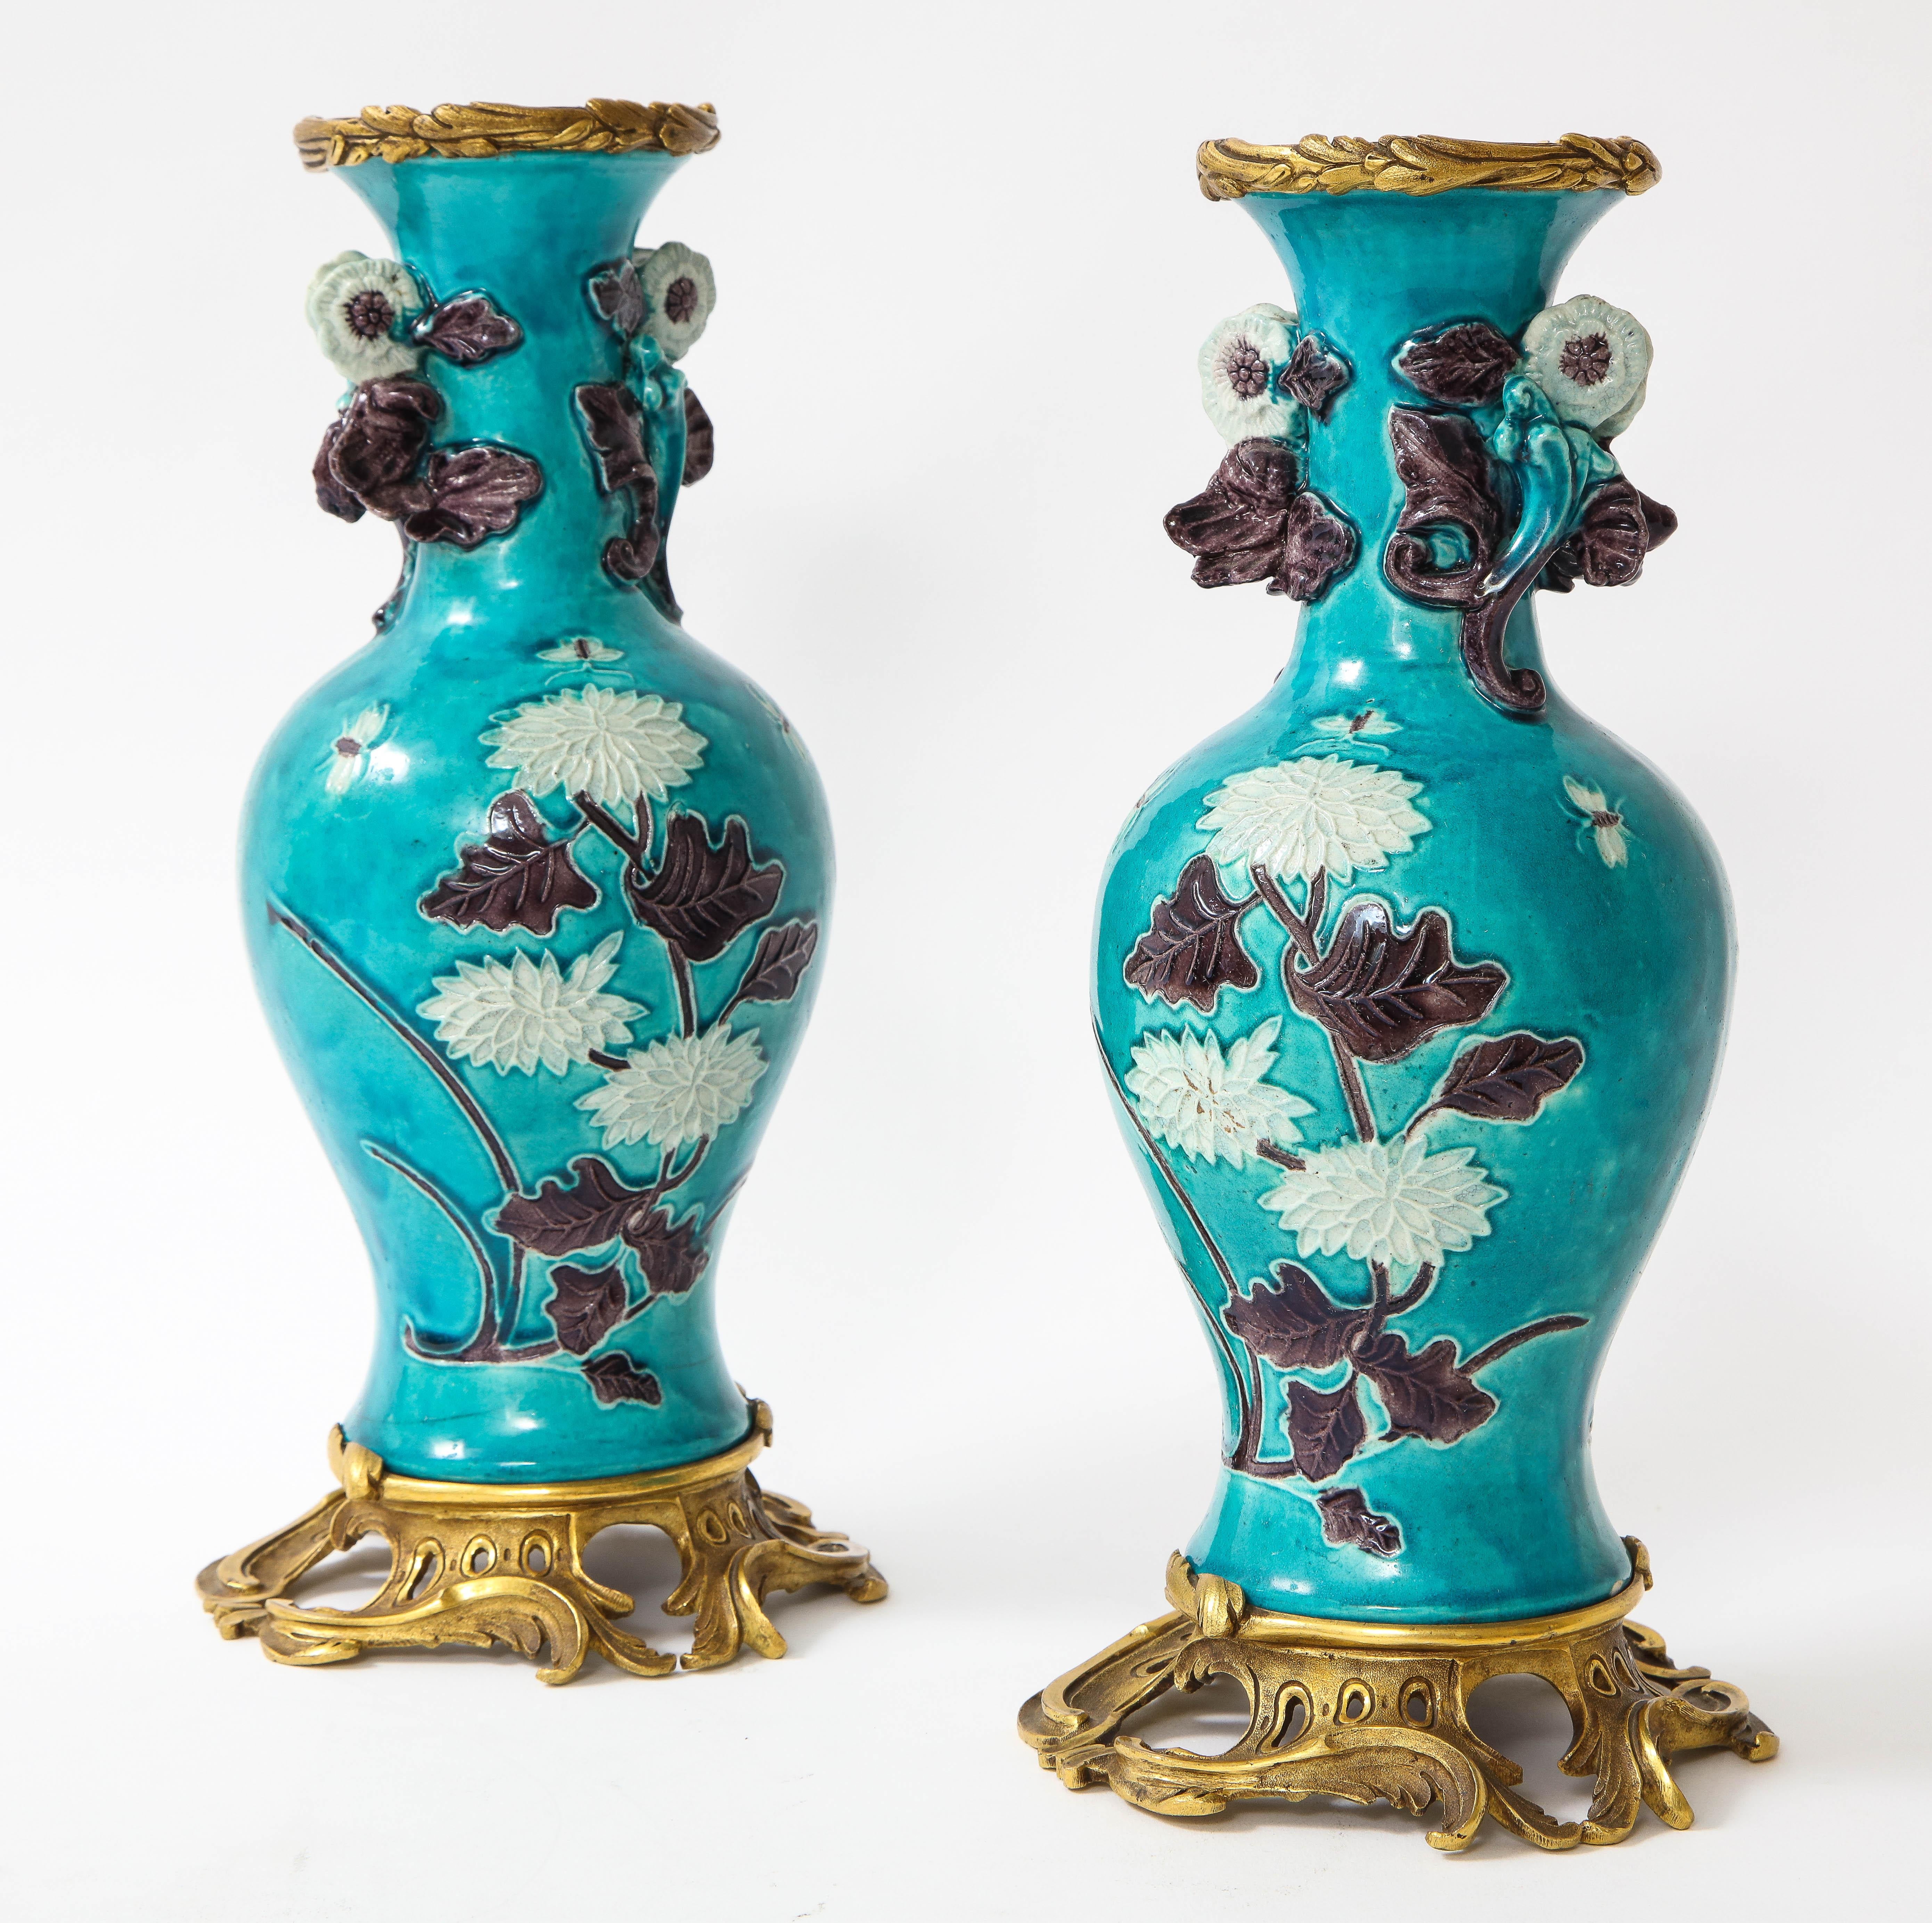 Pair of 18th Century Chinese Porcelain Vases with French Doré Bronze Mounts In Good Condition For Sale In New York, NY